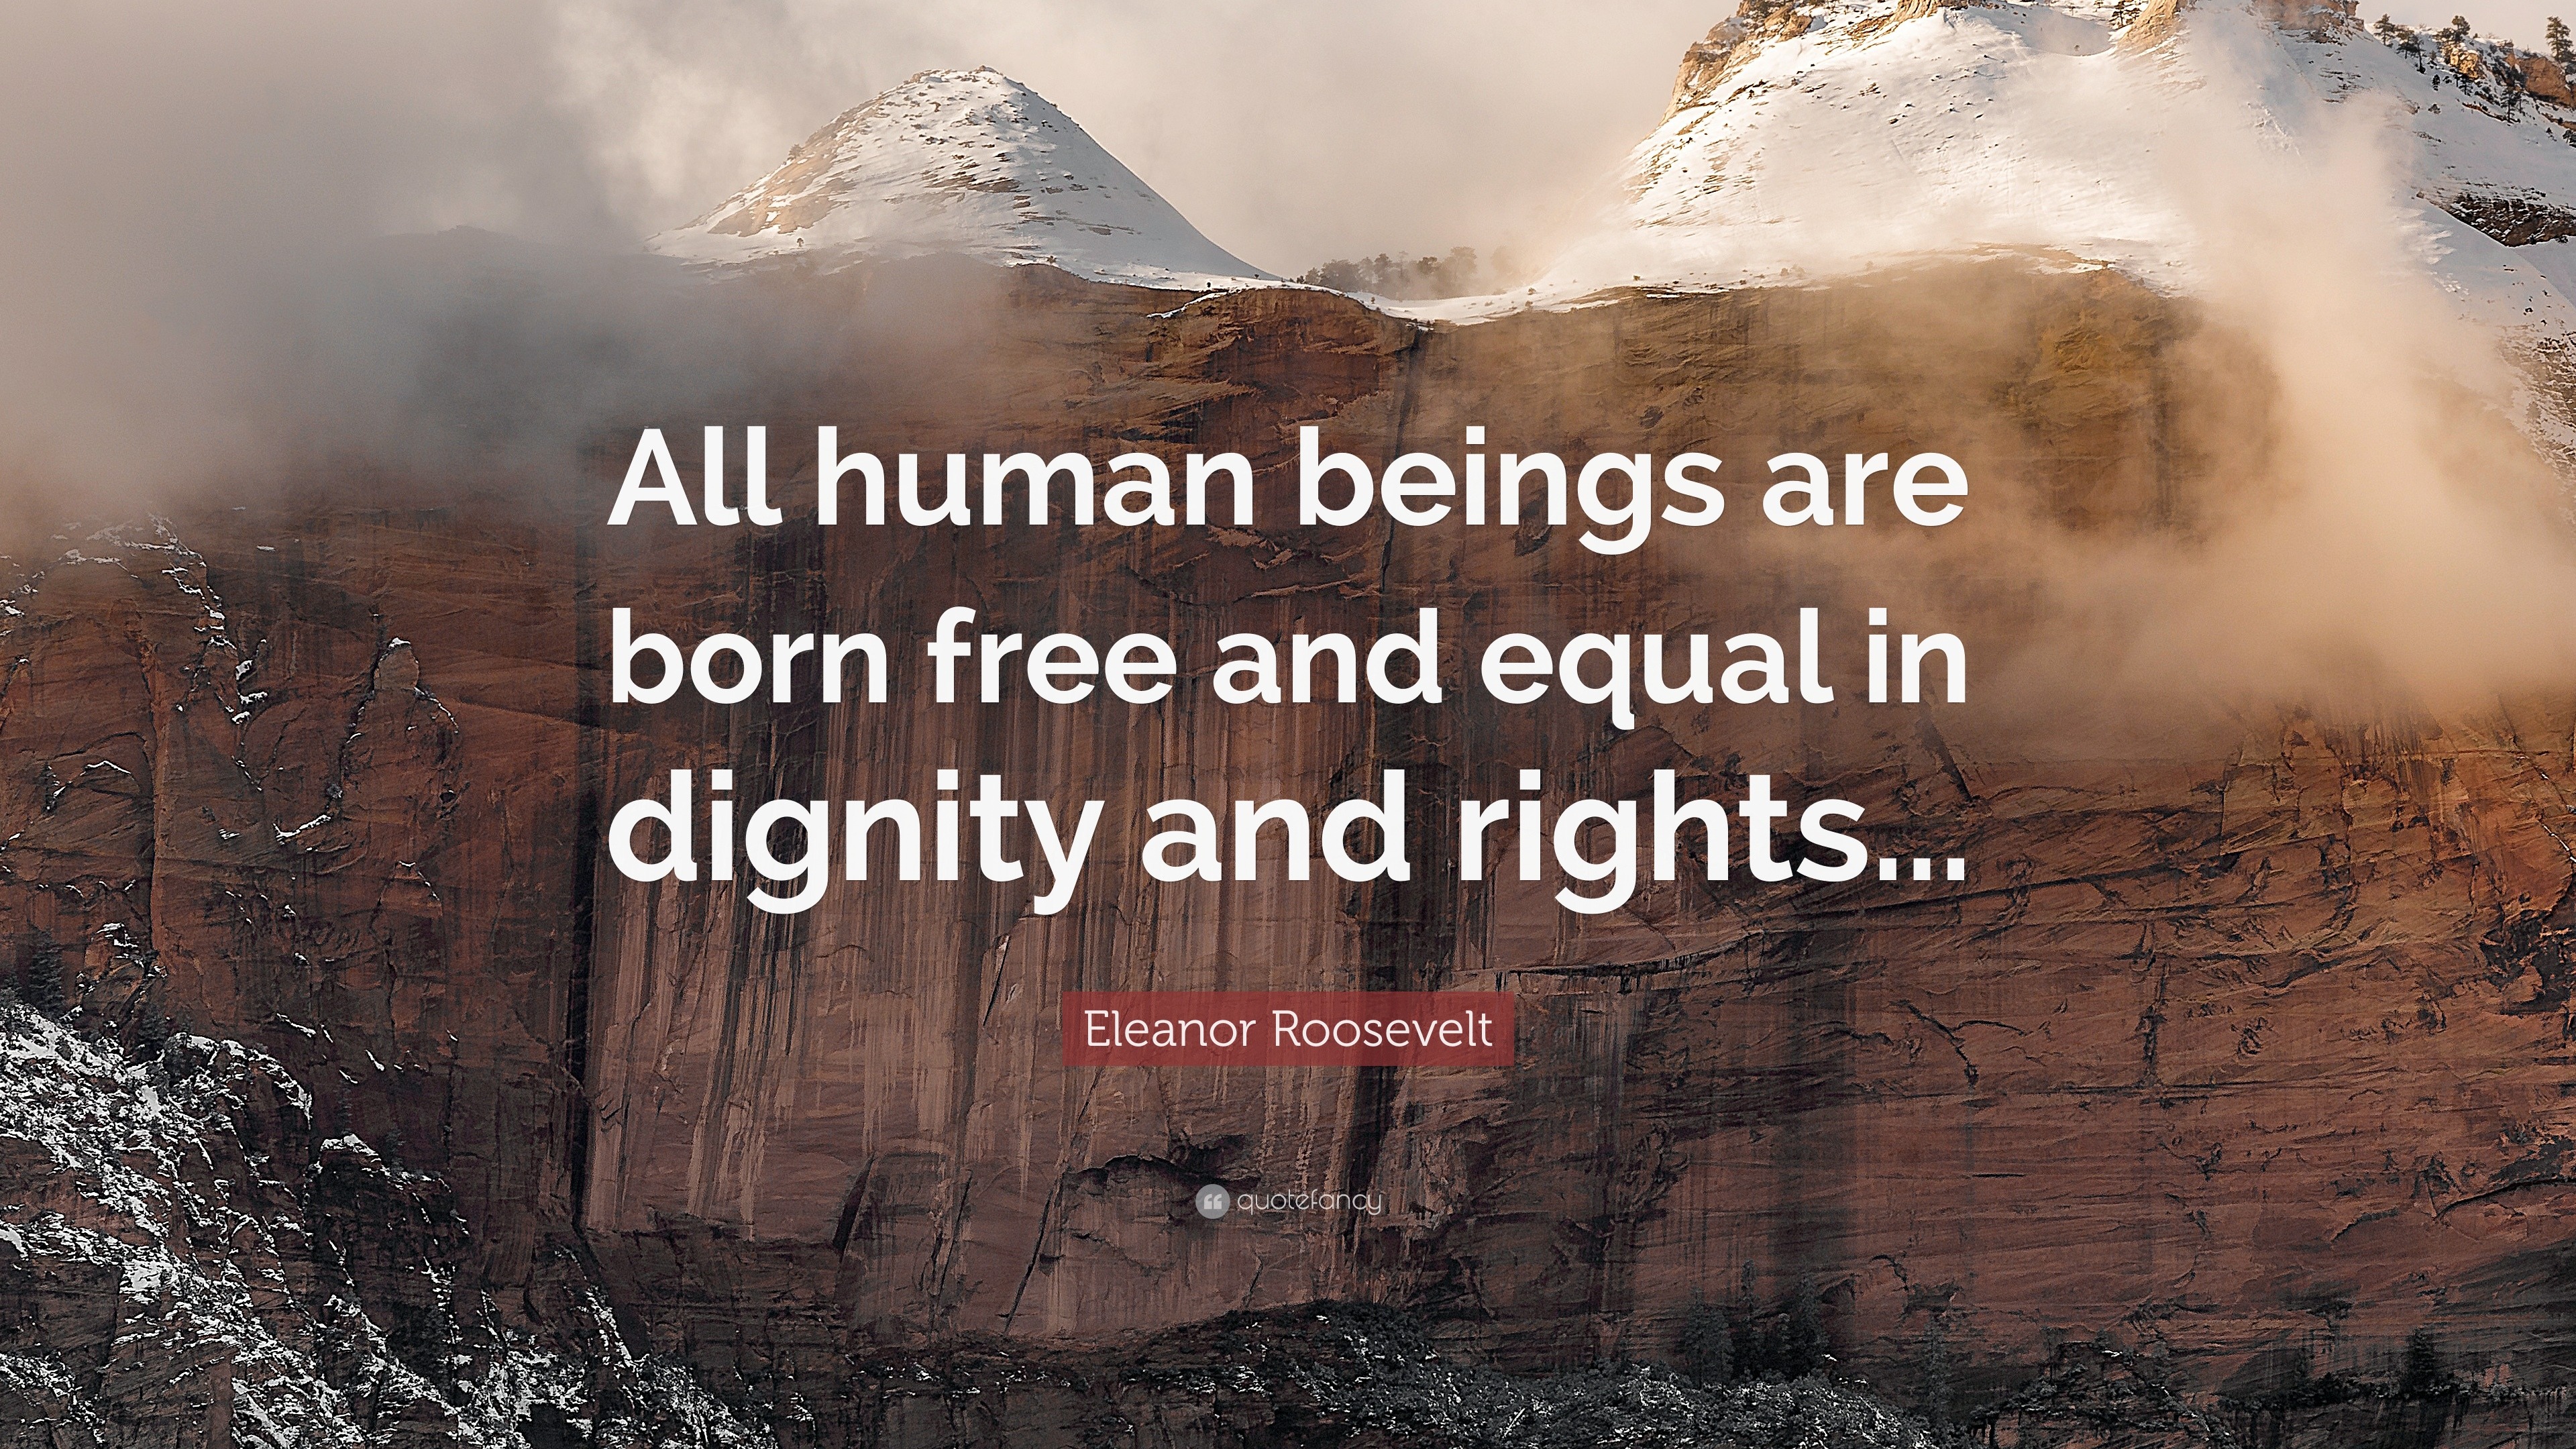 Eleanor Roosevelt Quote: “All human beings are born free and equal in